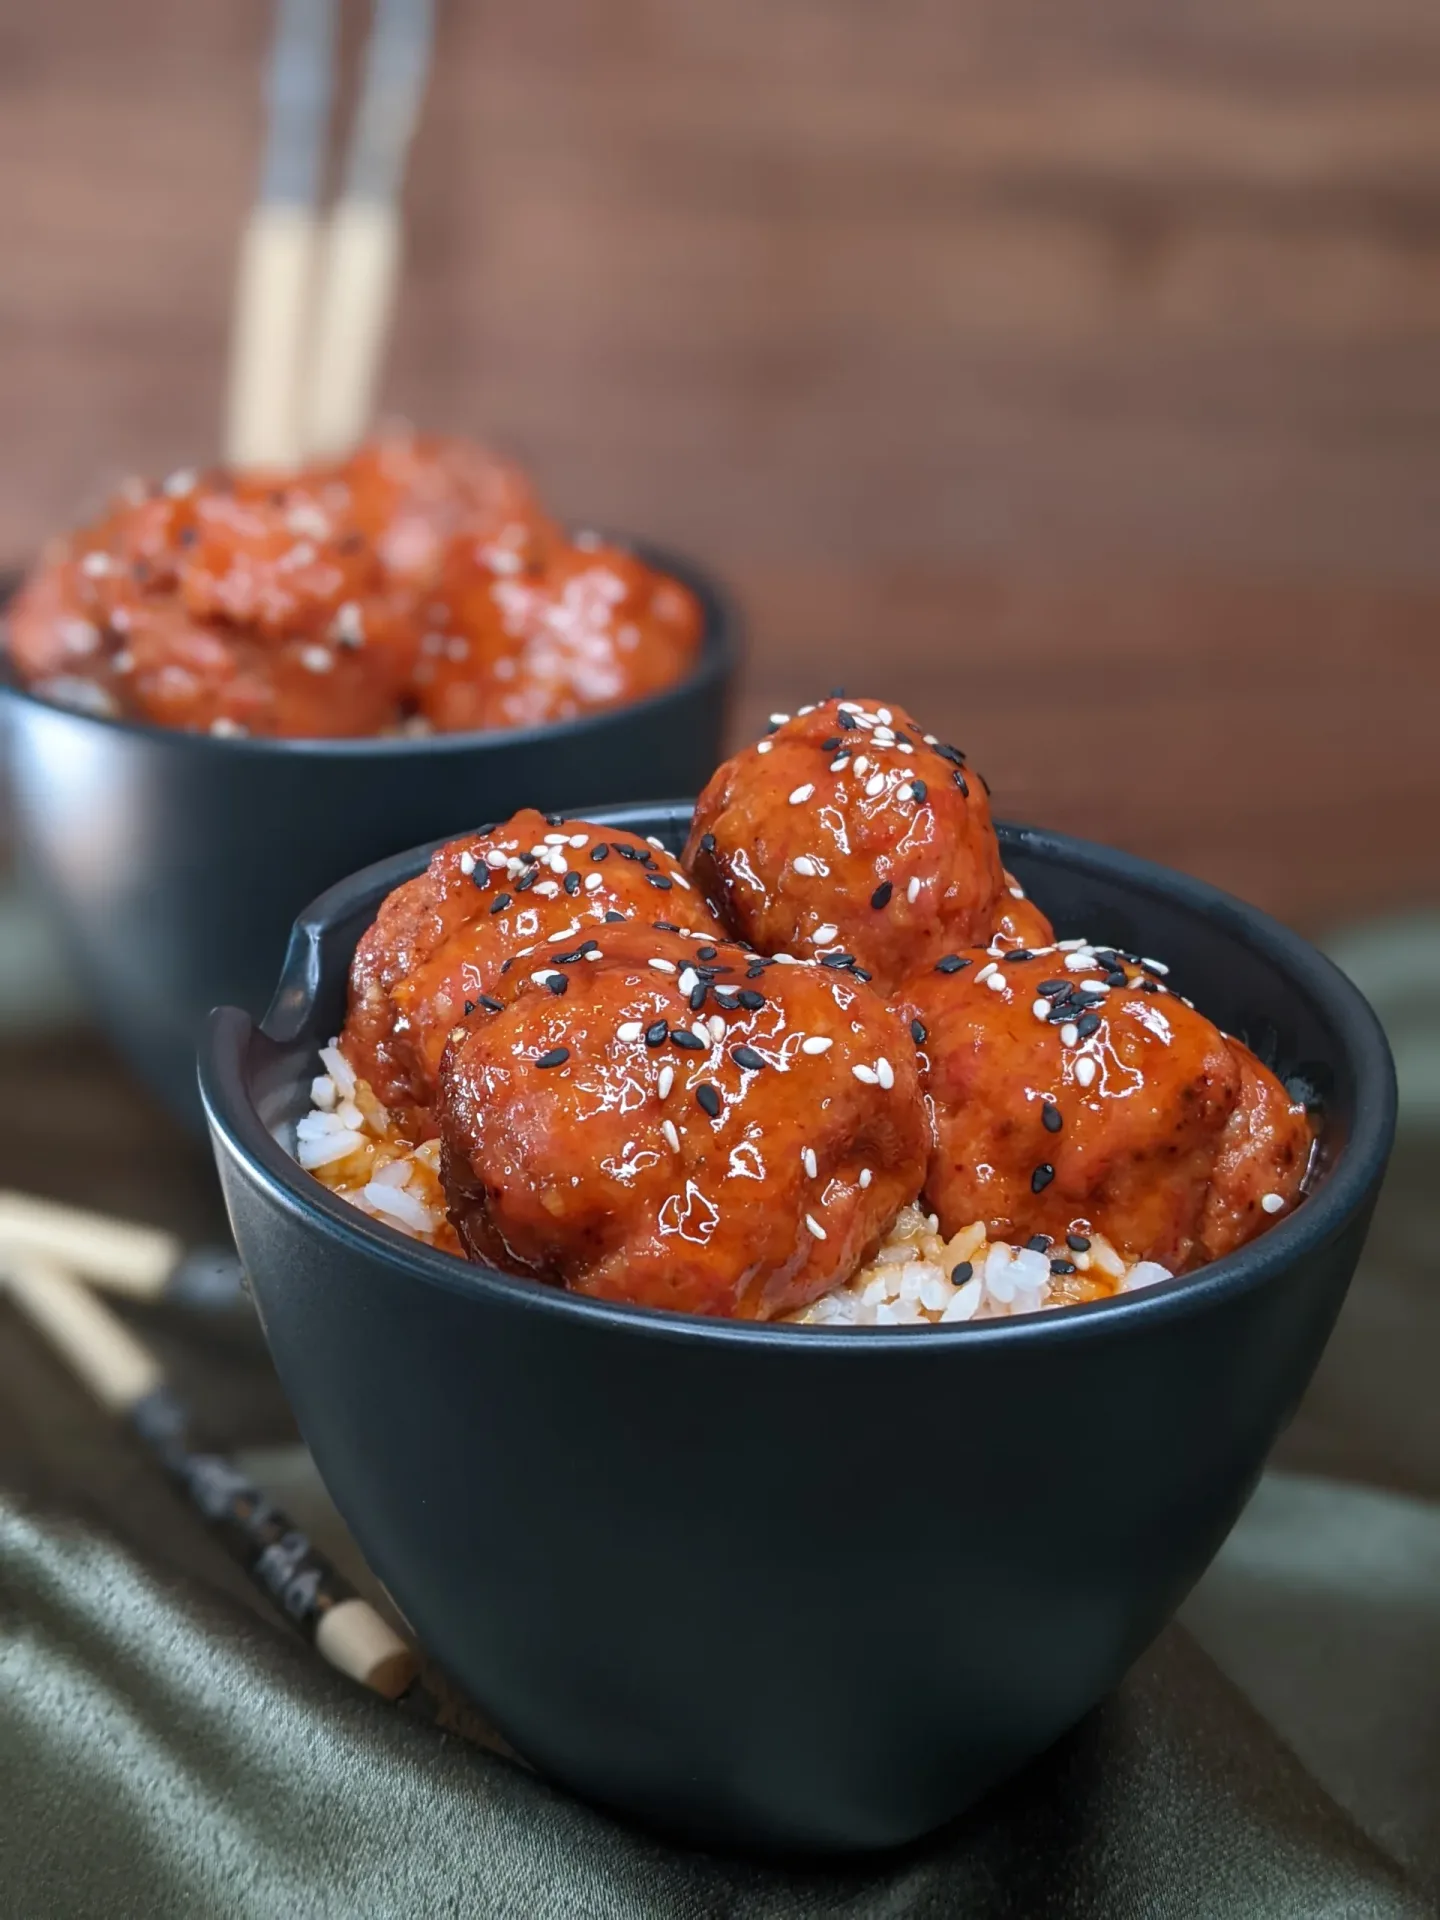 Featured image for “Sticky Honey-Siracha Smoked Pork Meatballs”